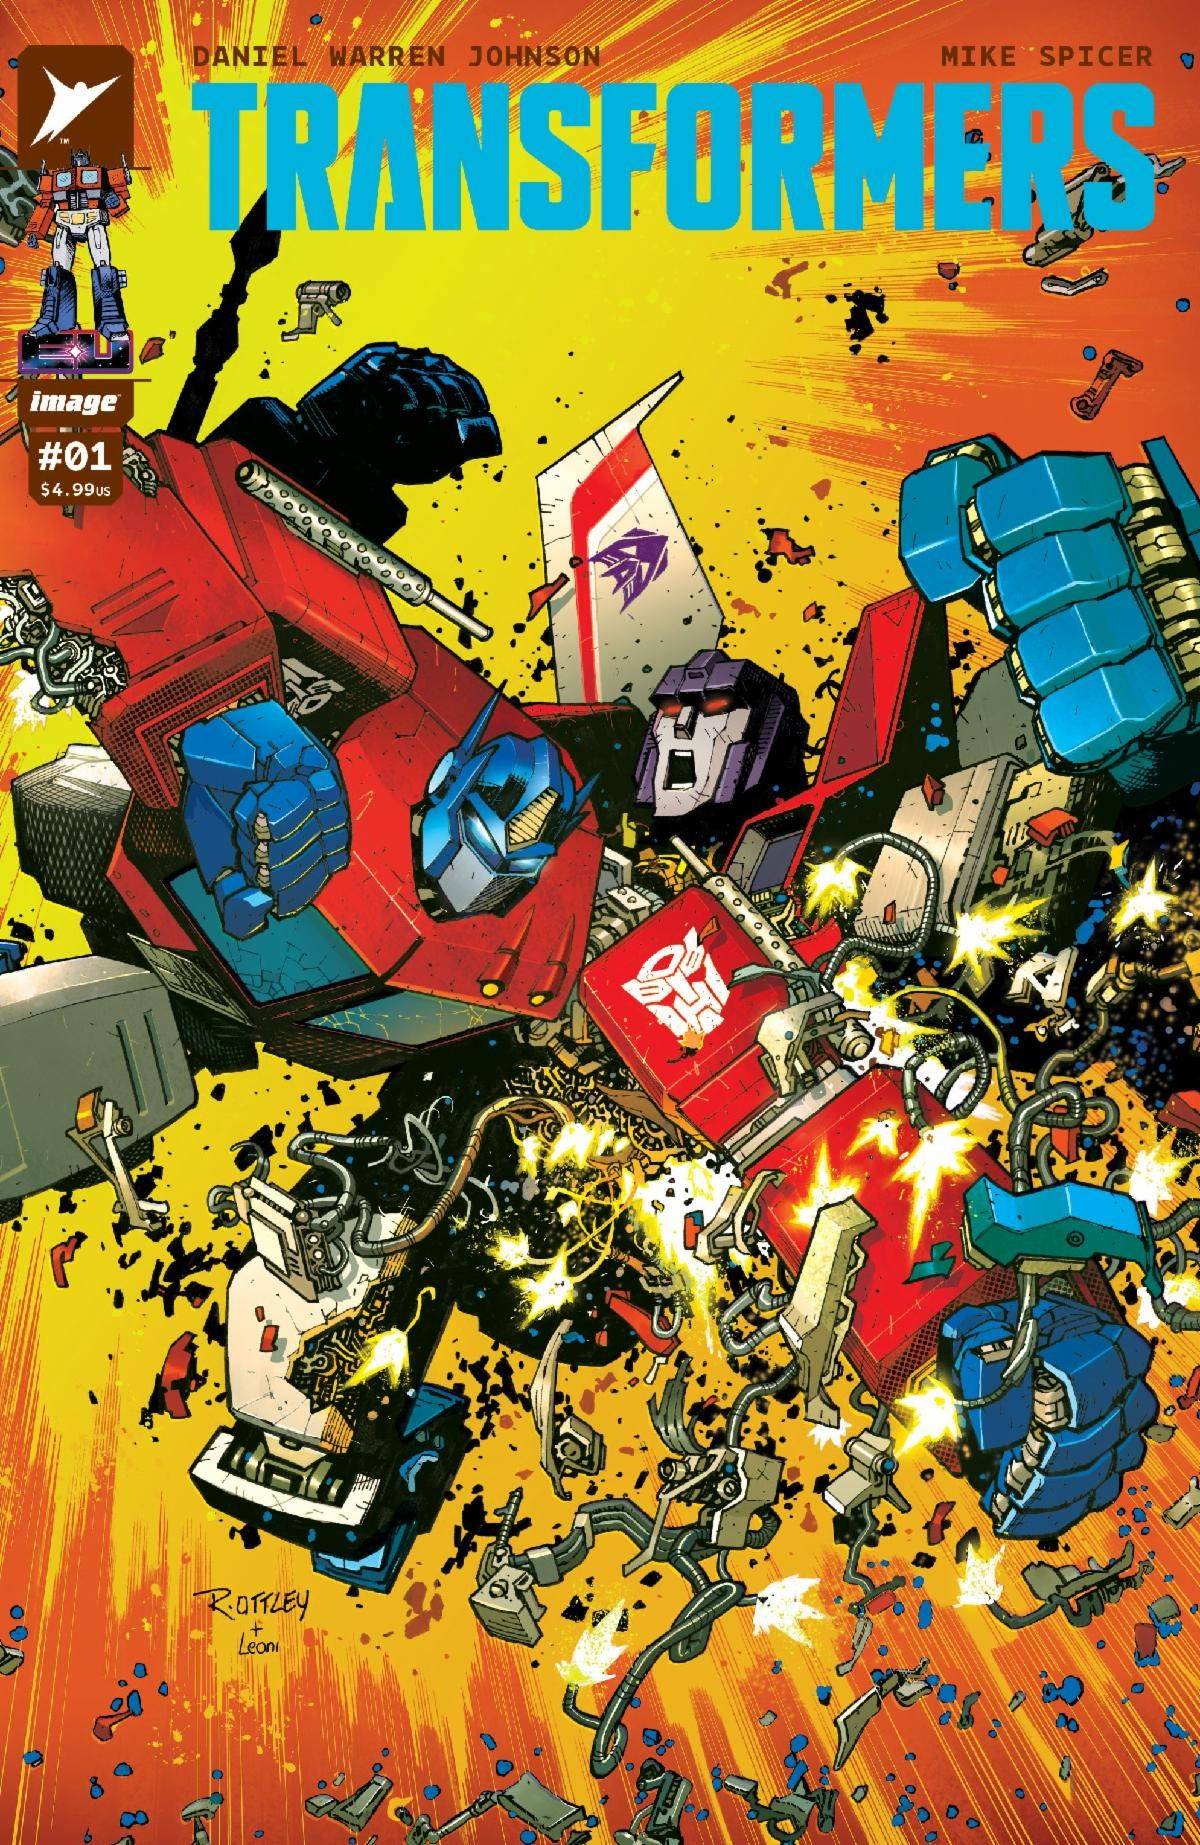 Transformers #1 IMAGE D Ottley 10/04/2023 | BD Cosmos